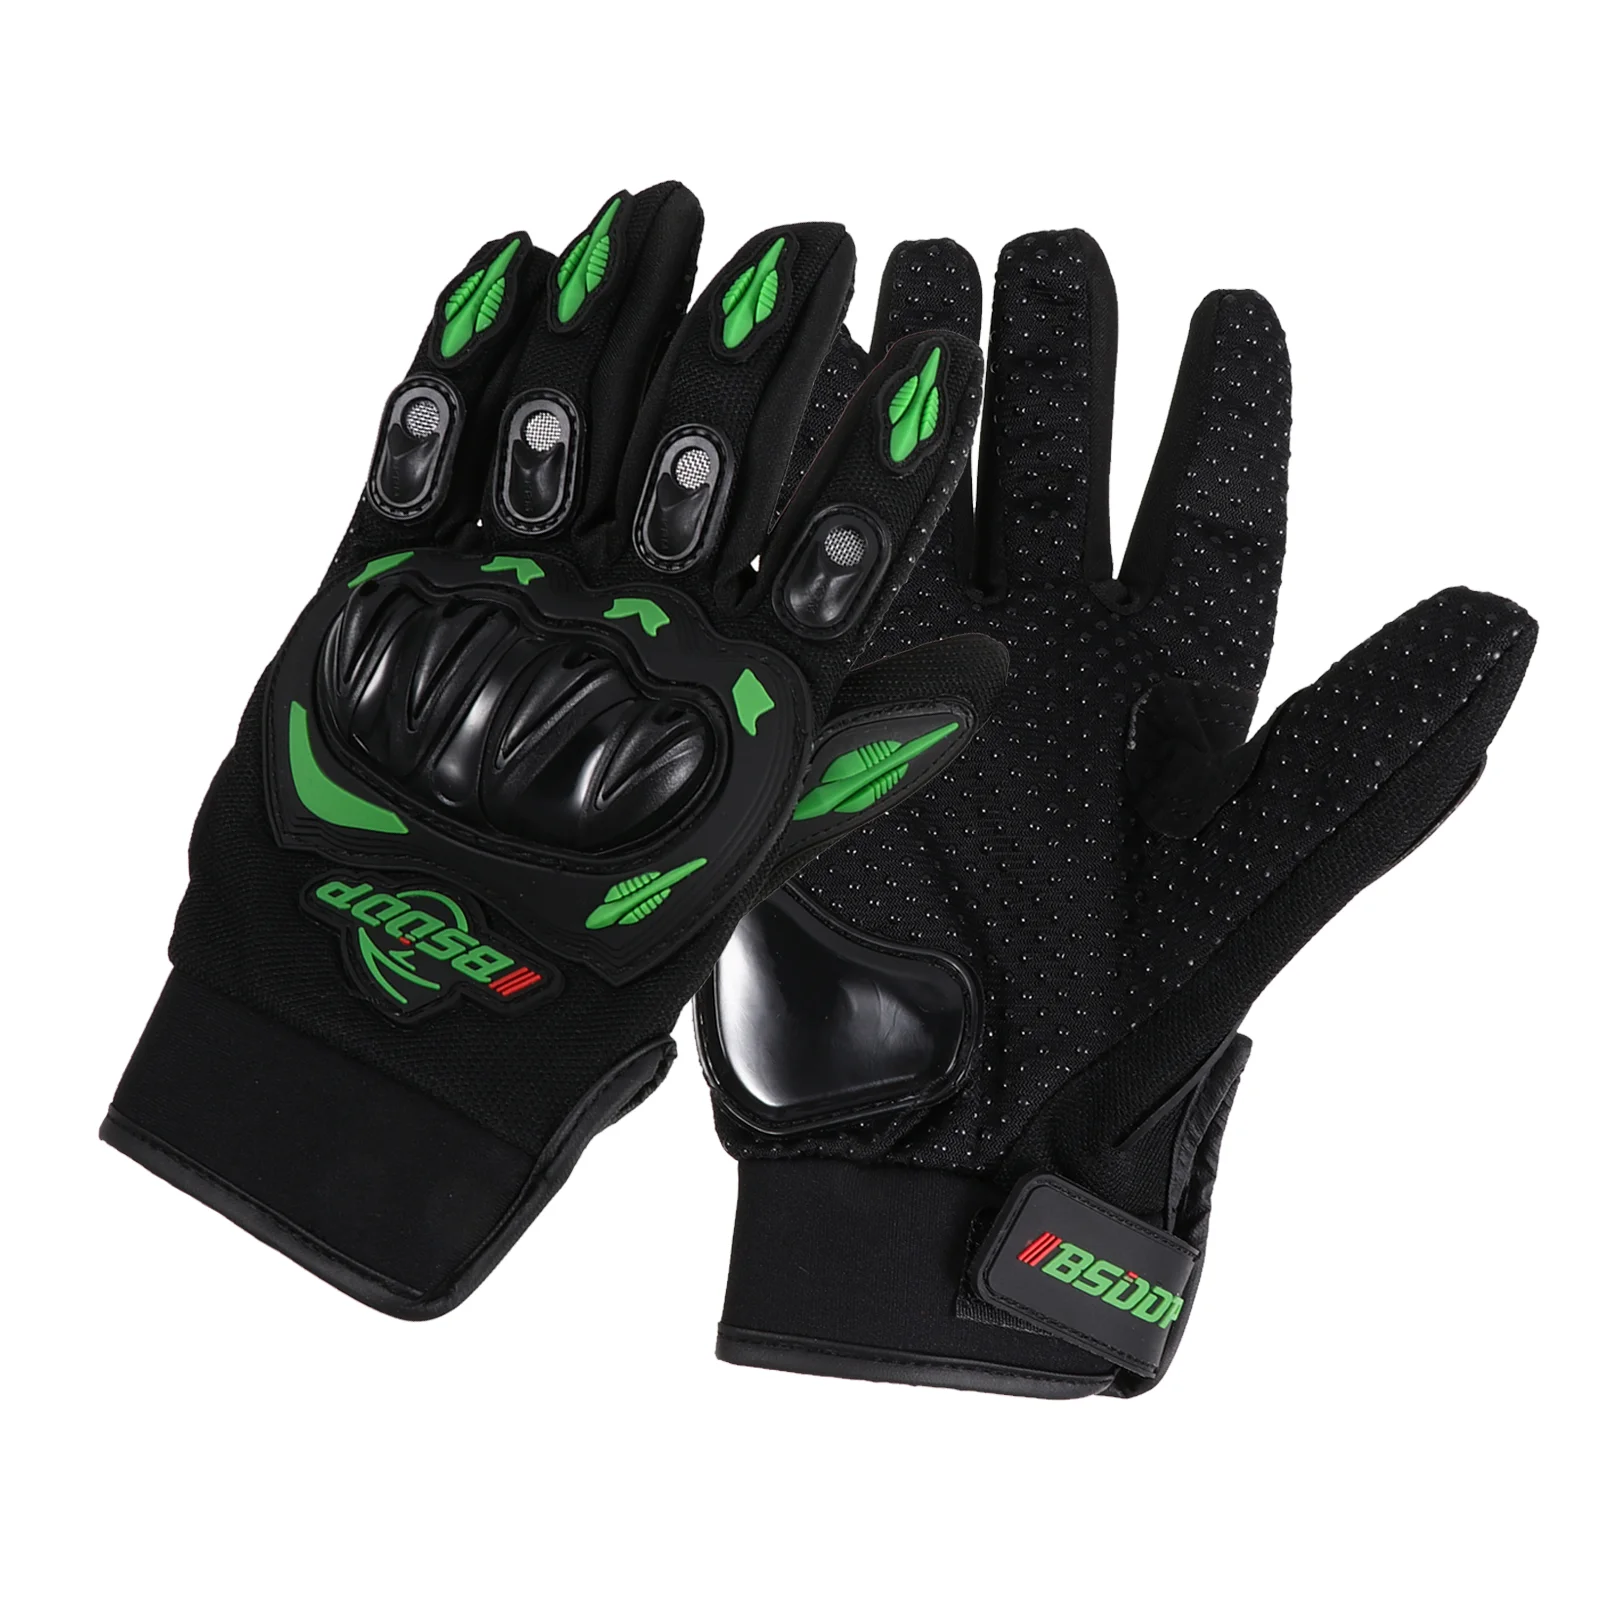 

Ridding Gloves Motorbike Cycling Woman Riding Biker for Men Full Fingers Windproof Adult Racing Car